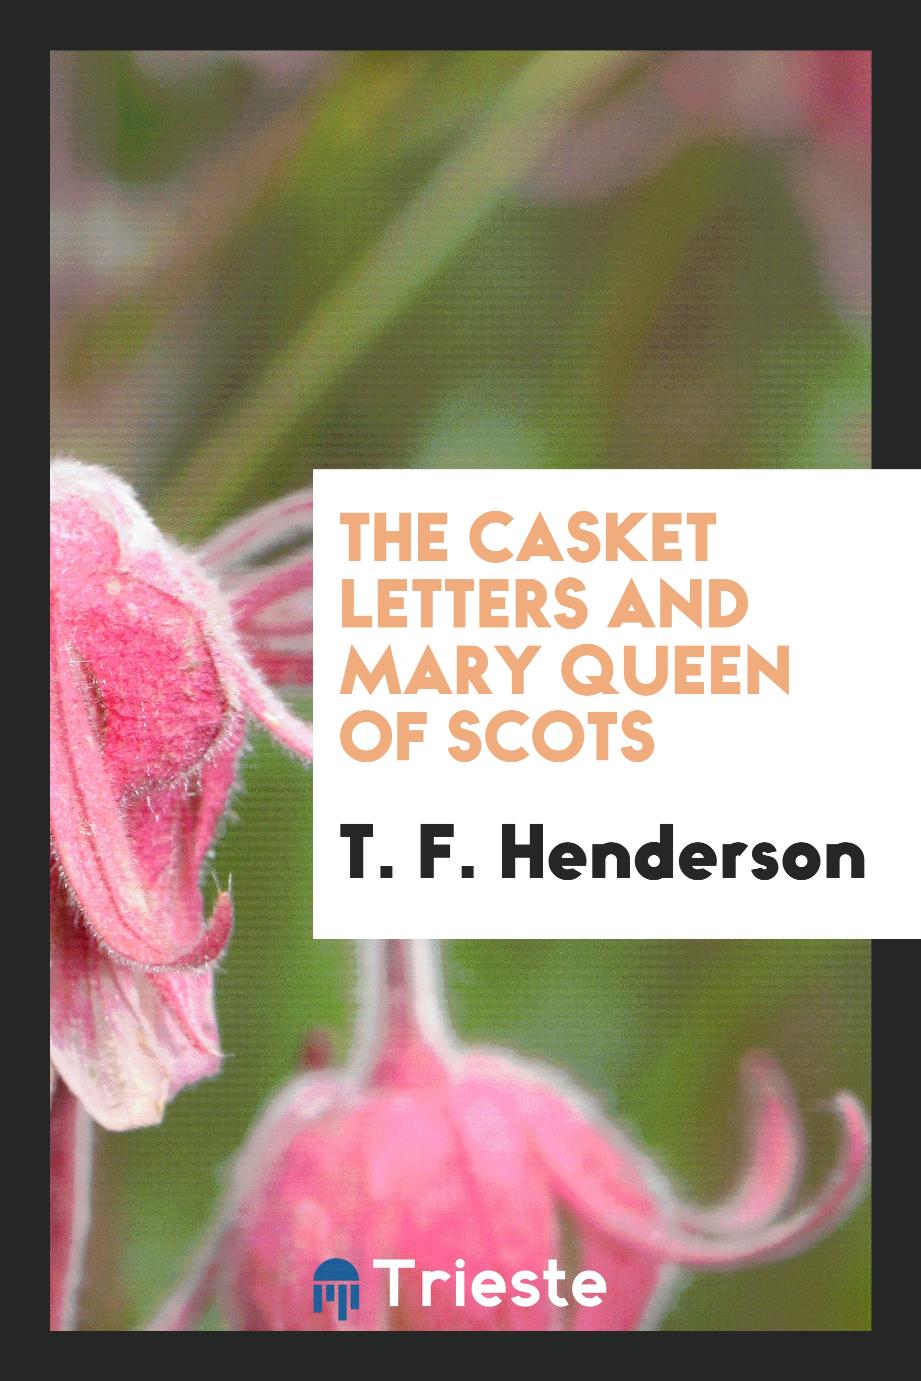 The casket letters and Mary queen of Scots